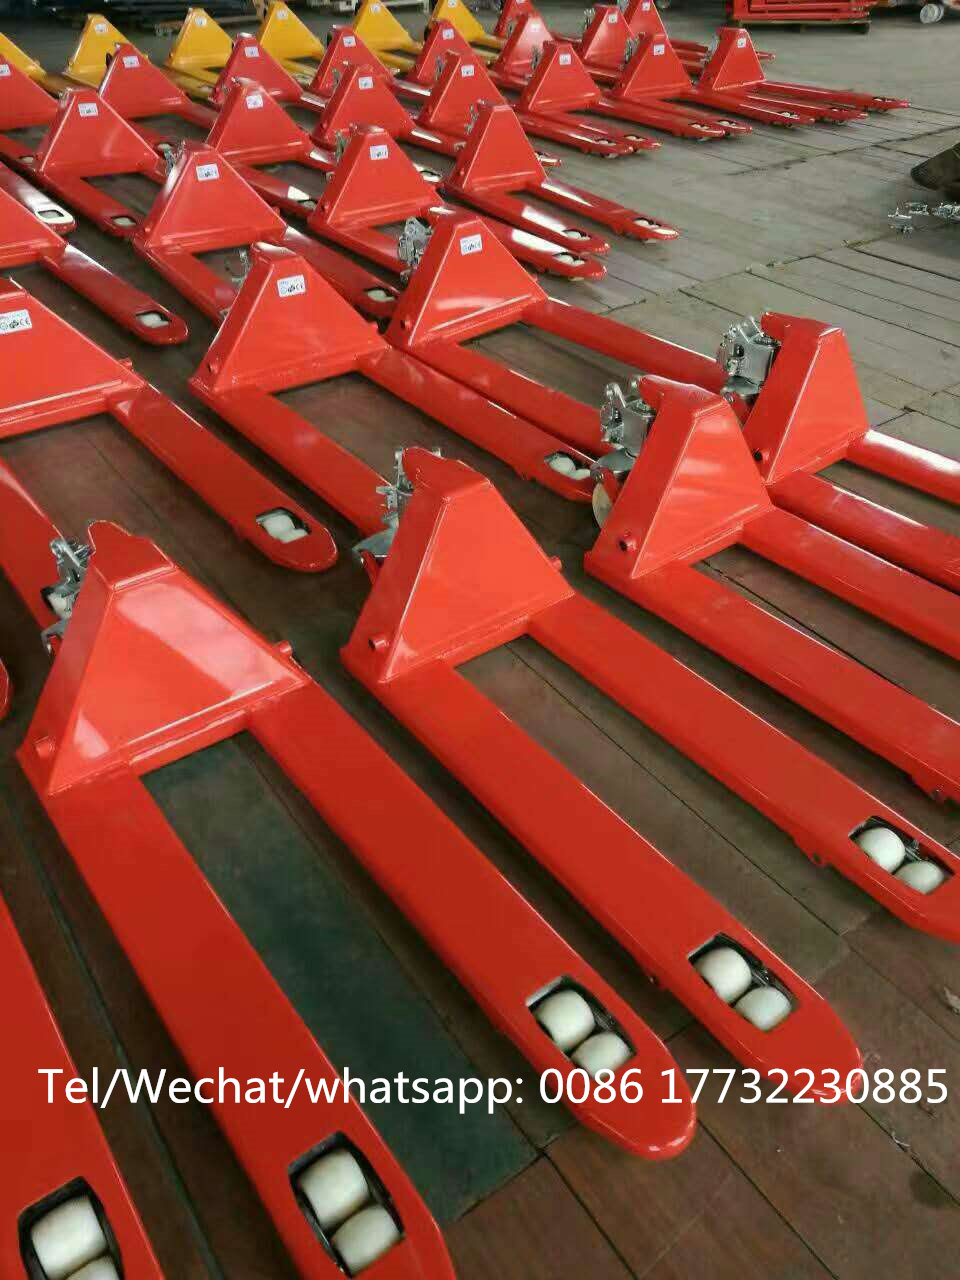 Do you know more about pallet jack?